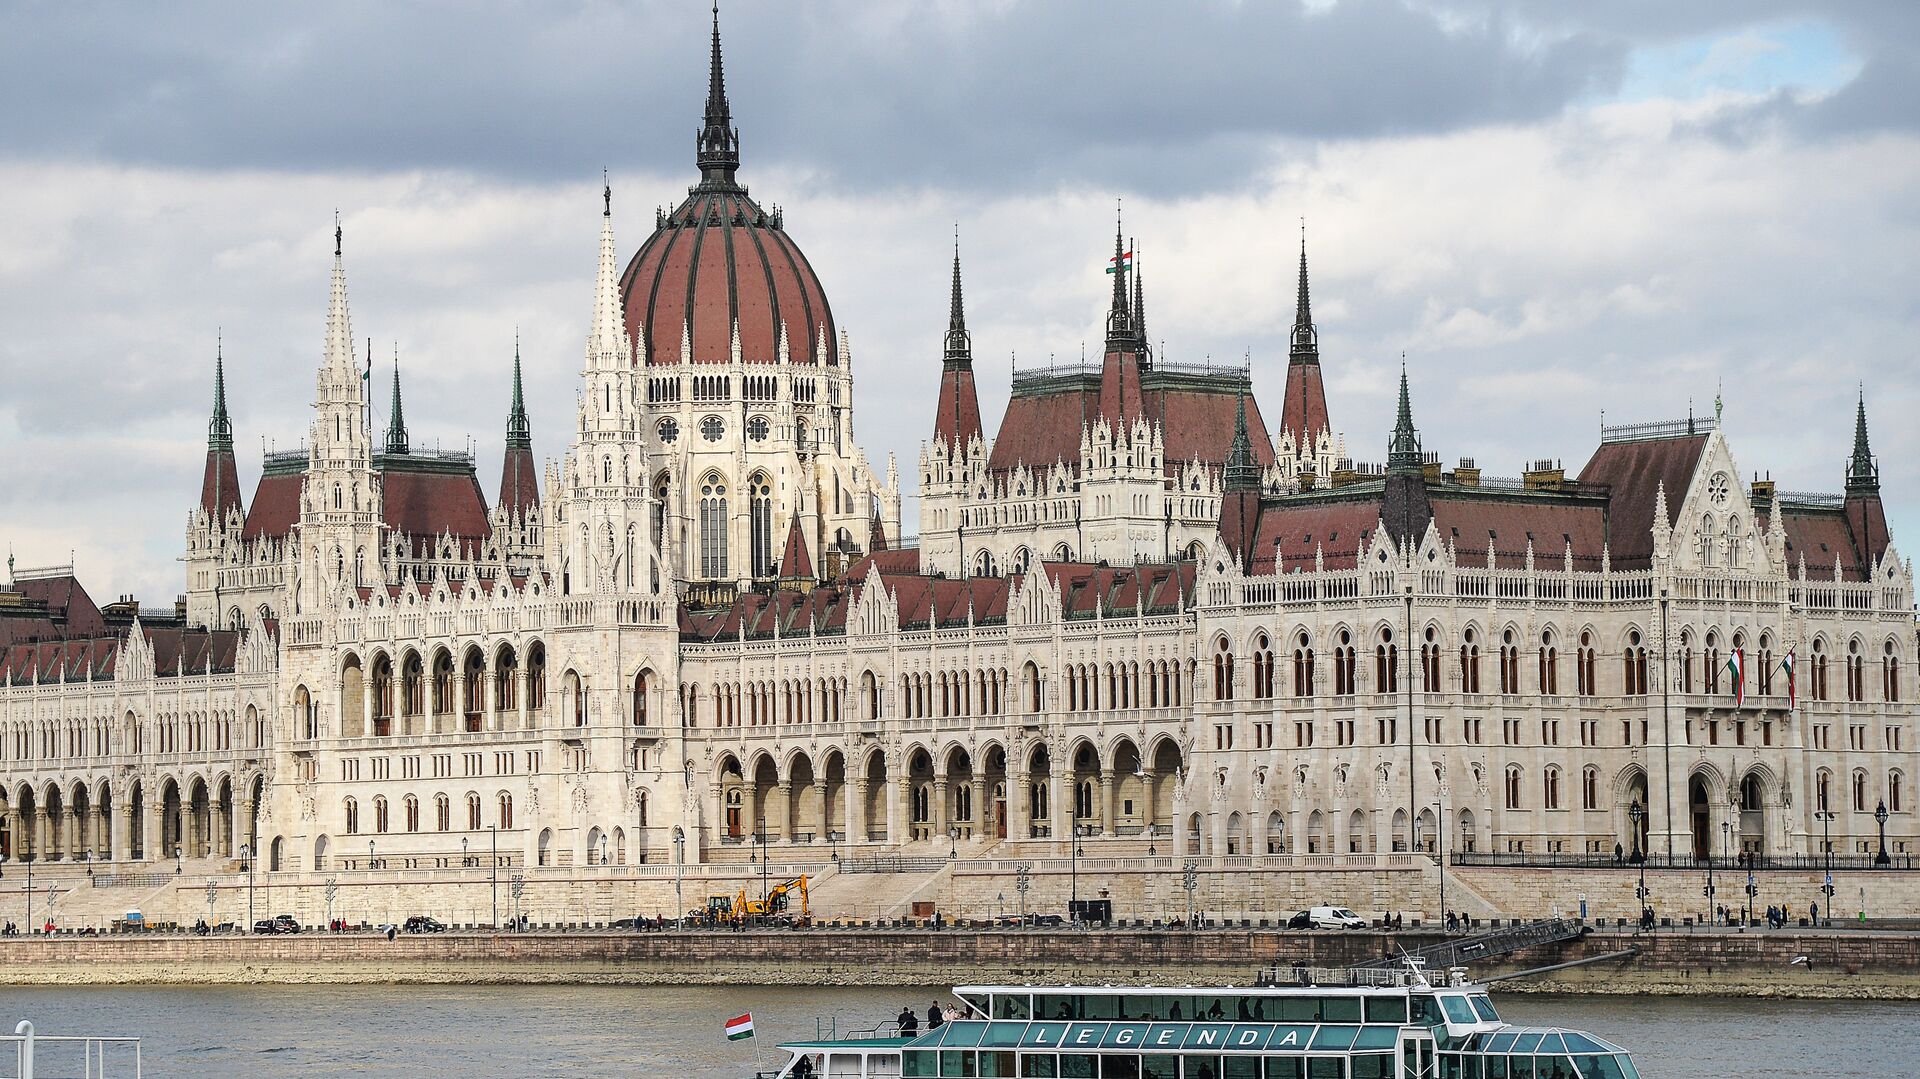 Media reports that the Hungarian parliament is unlikely to approve Sweden’s application to NATO